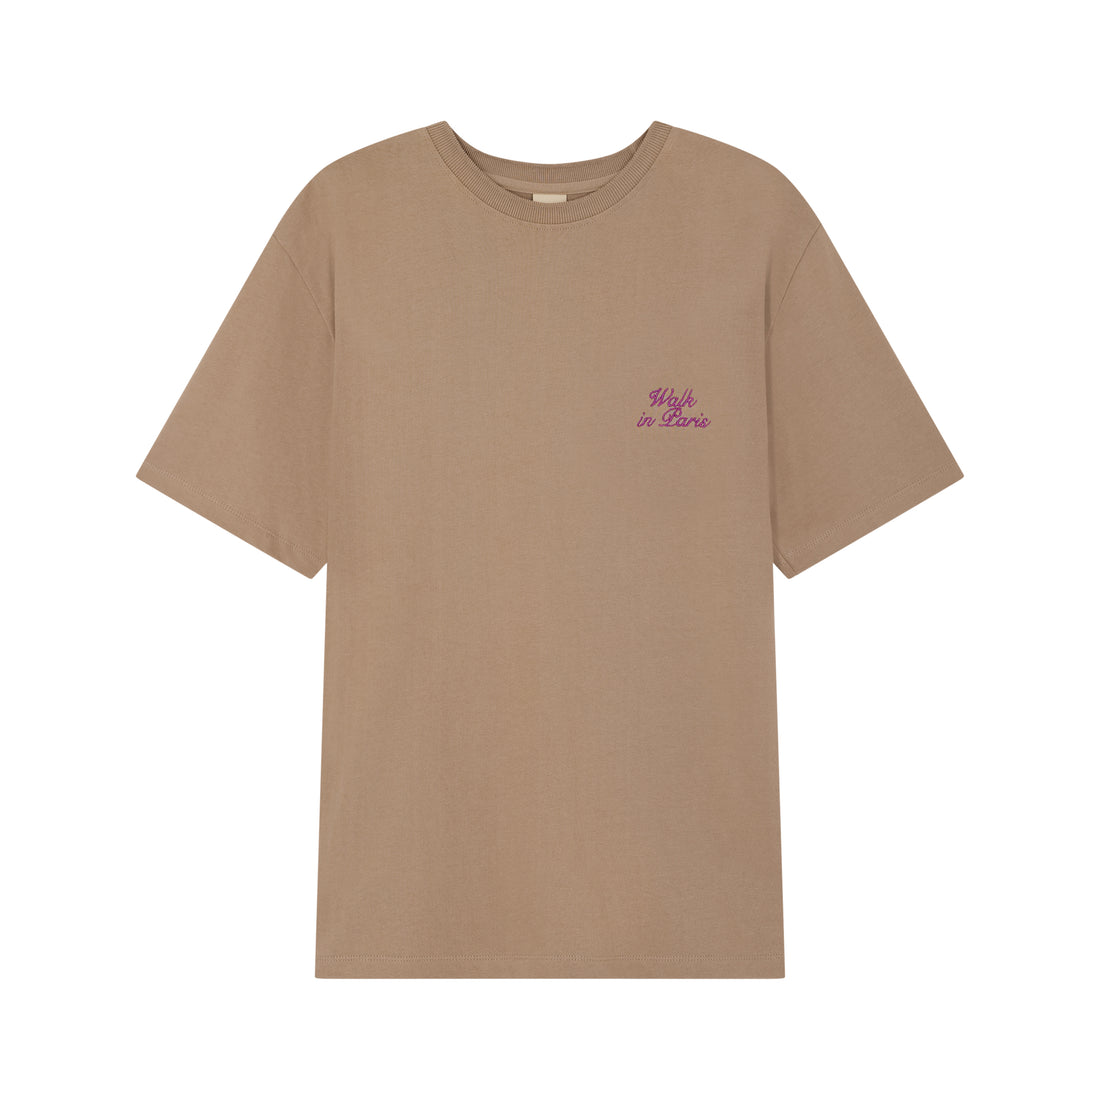 The clay embroidered t-shirt